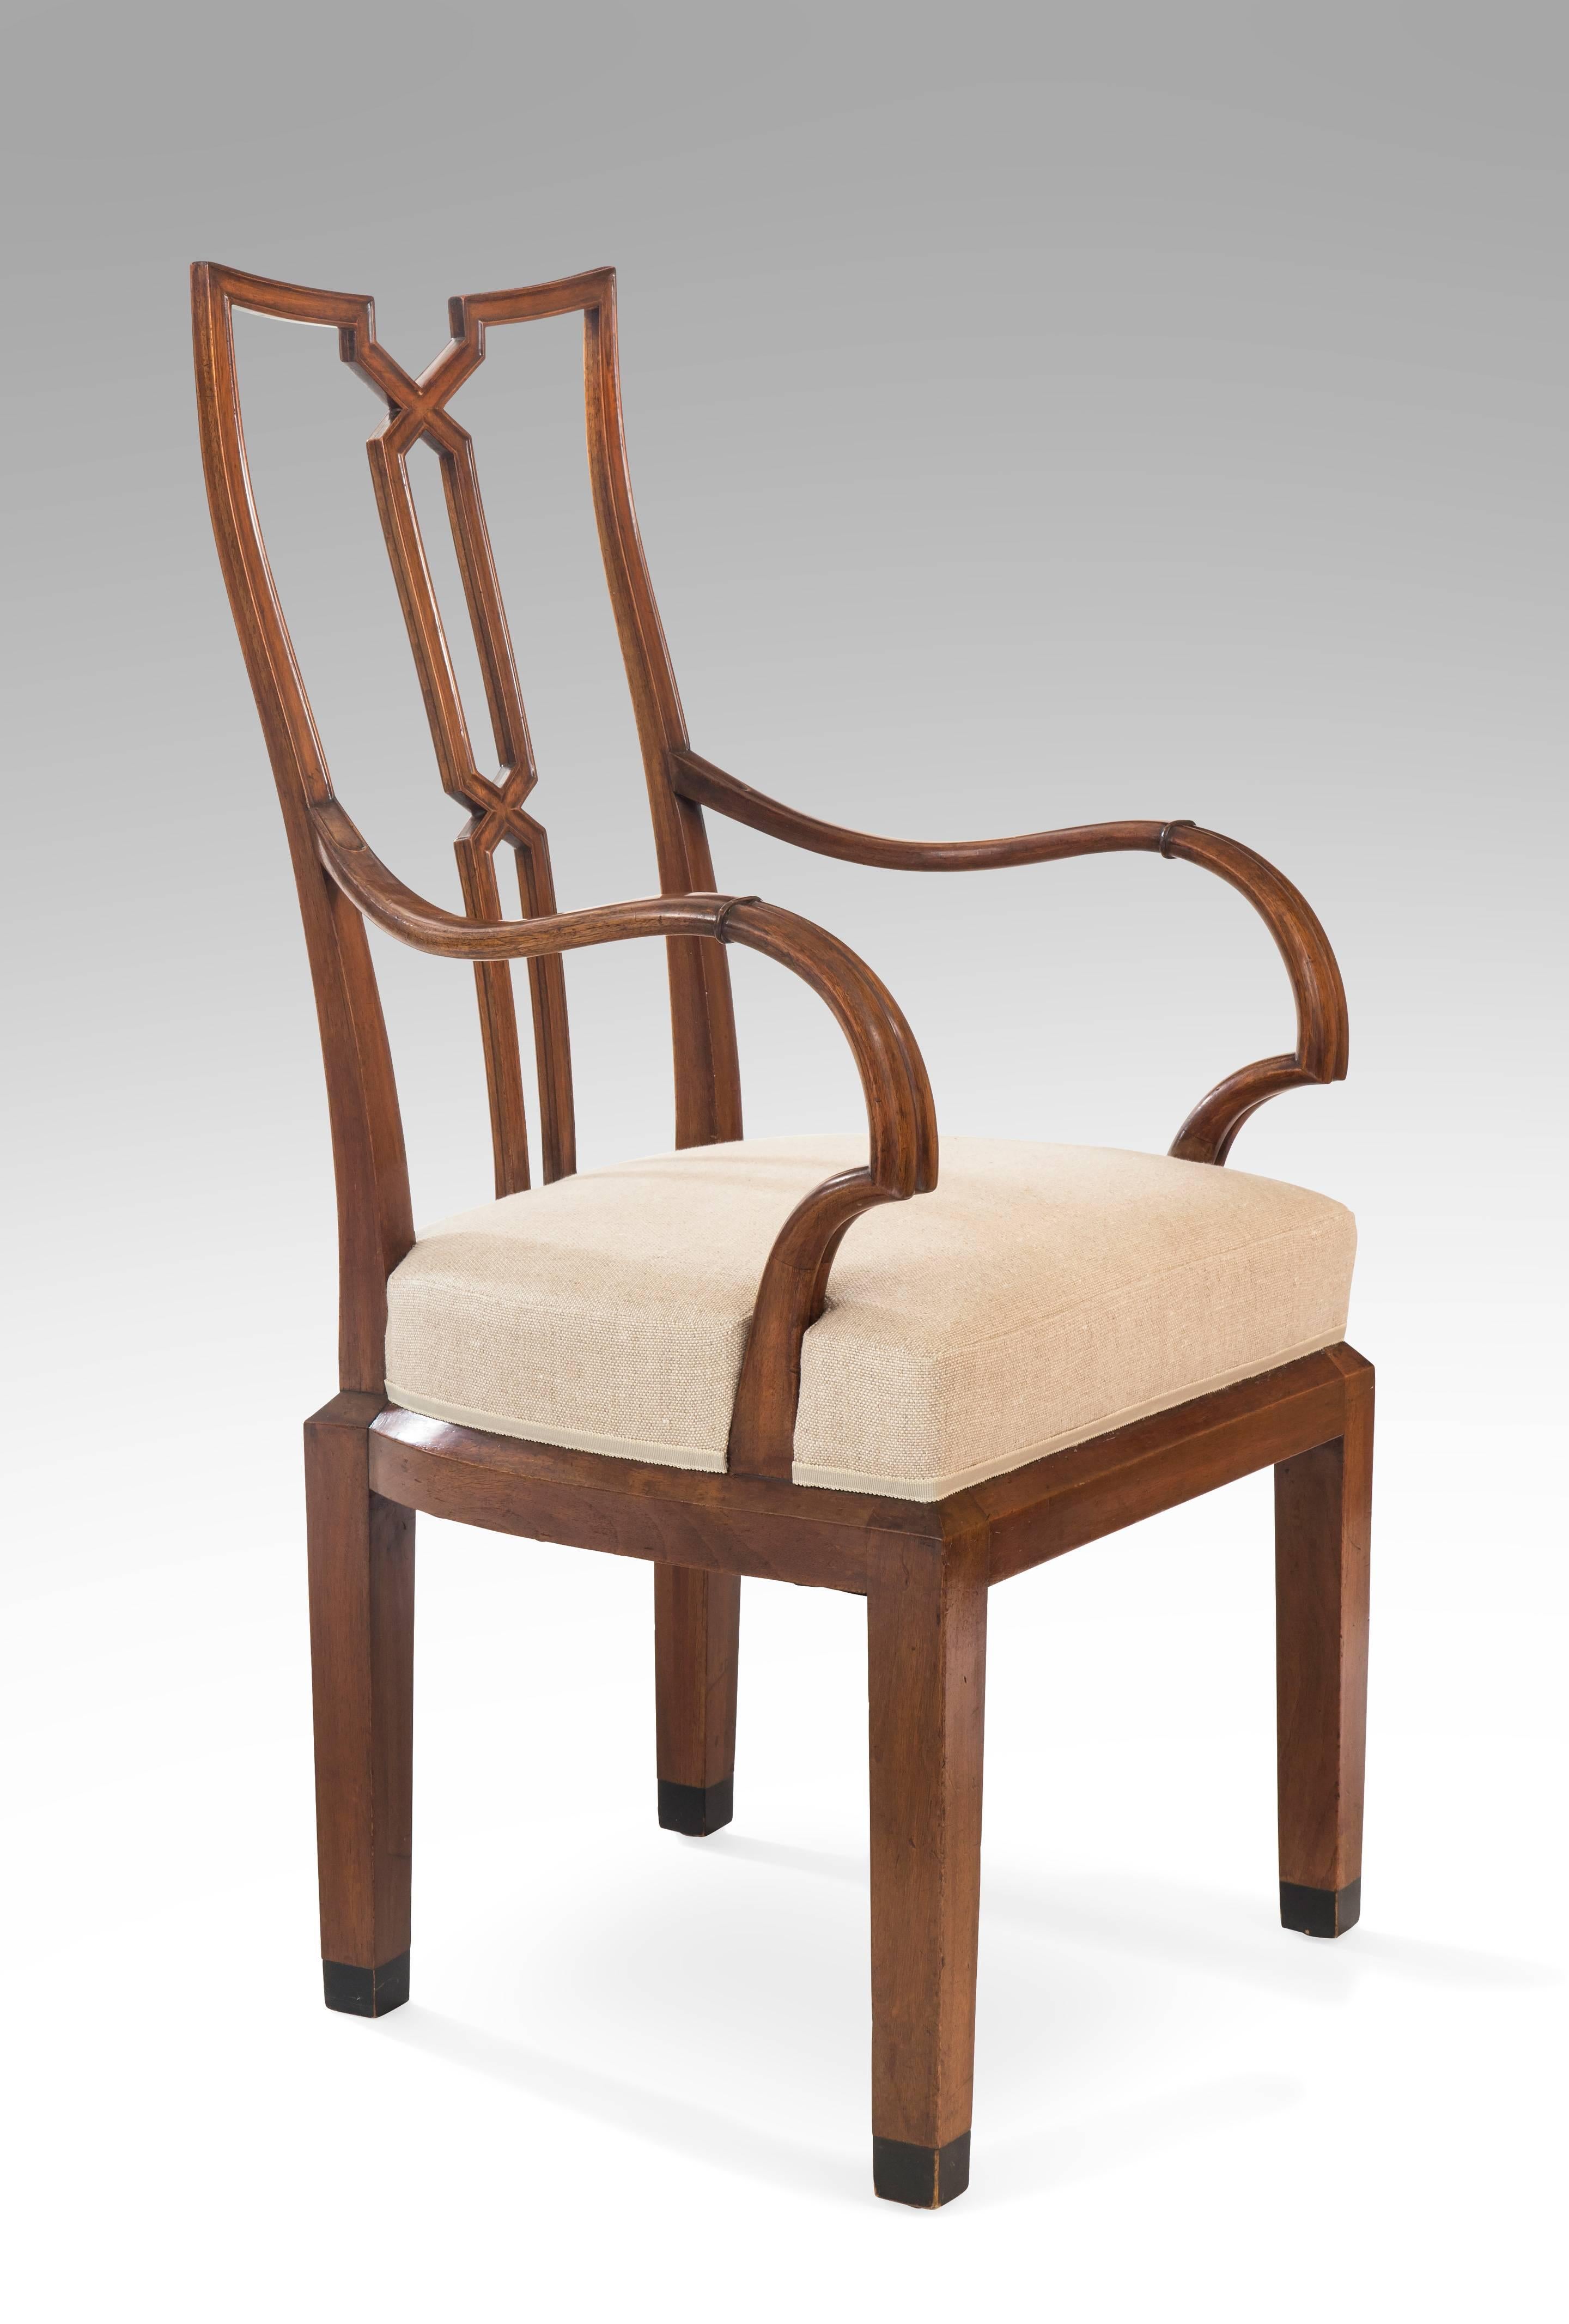 Stylish, comfortable and of impressive scale. The bisected toprail, above a molded x-form splat, the  curvaceous back issuing sinuous armrest above a chamfered apron, the chamfered legs with ebonized feet. 

This chair is illustrated A. Koch (ed.),